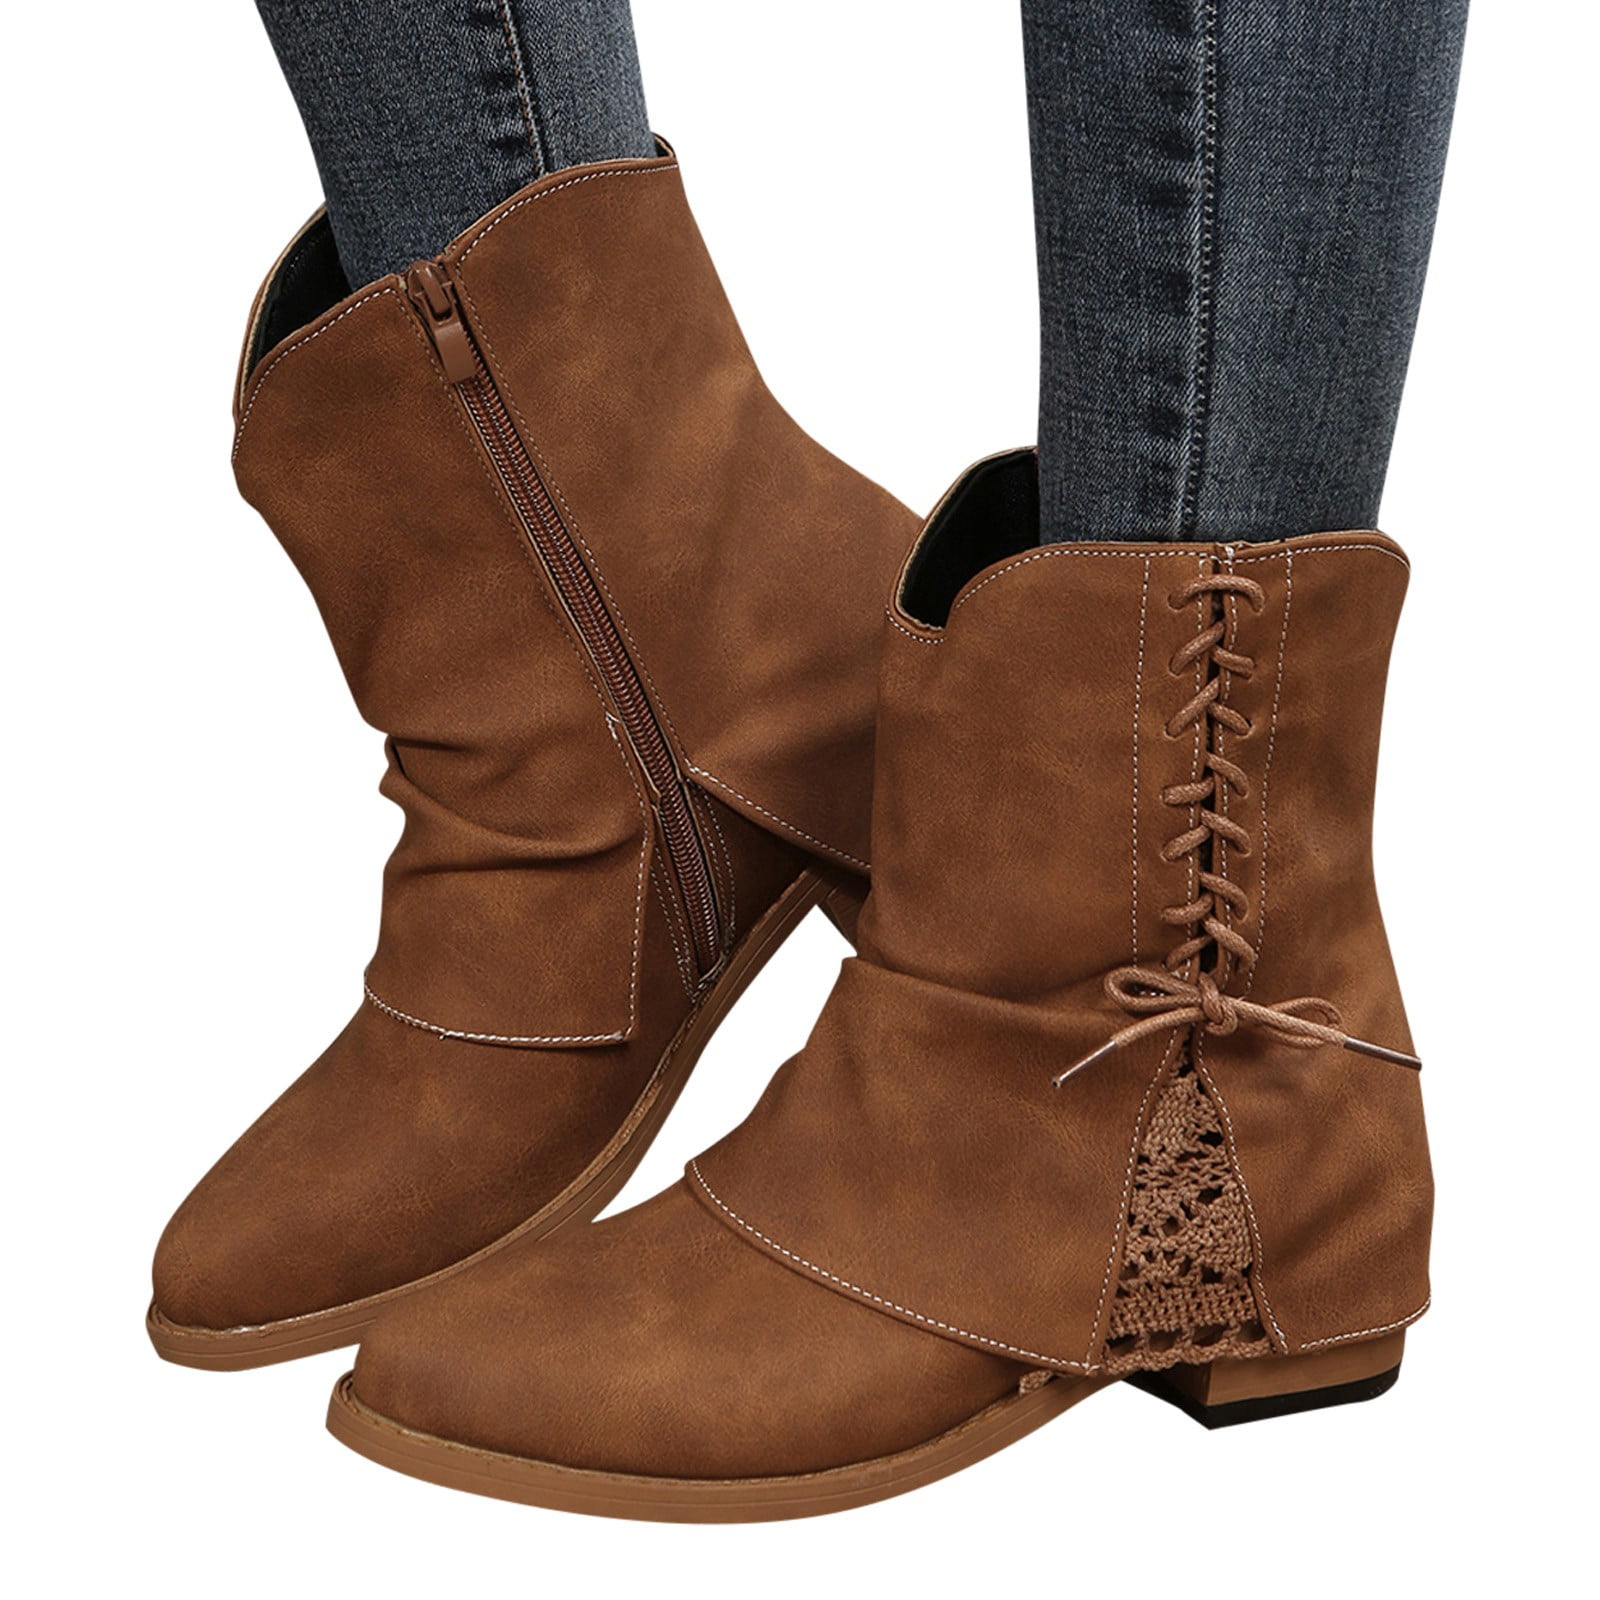 Brown Greased Leather Women's Ankle Boot with Laces